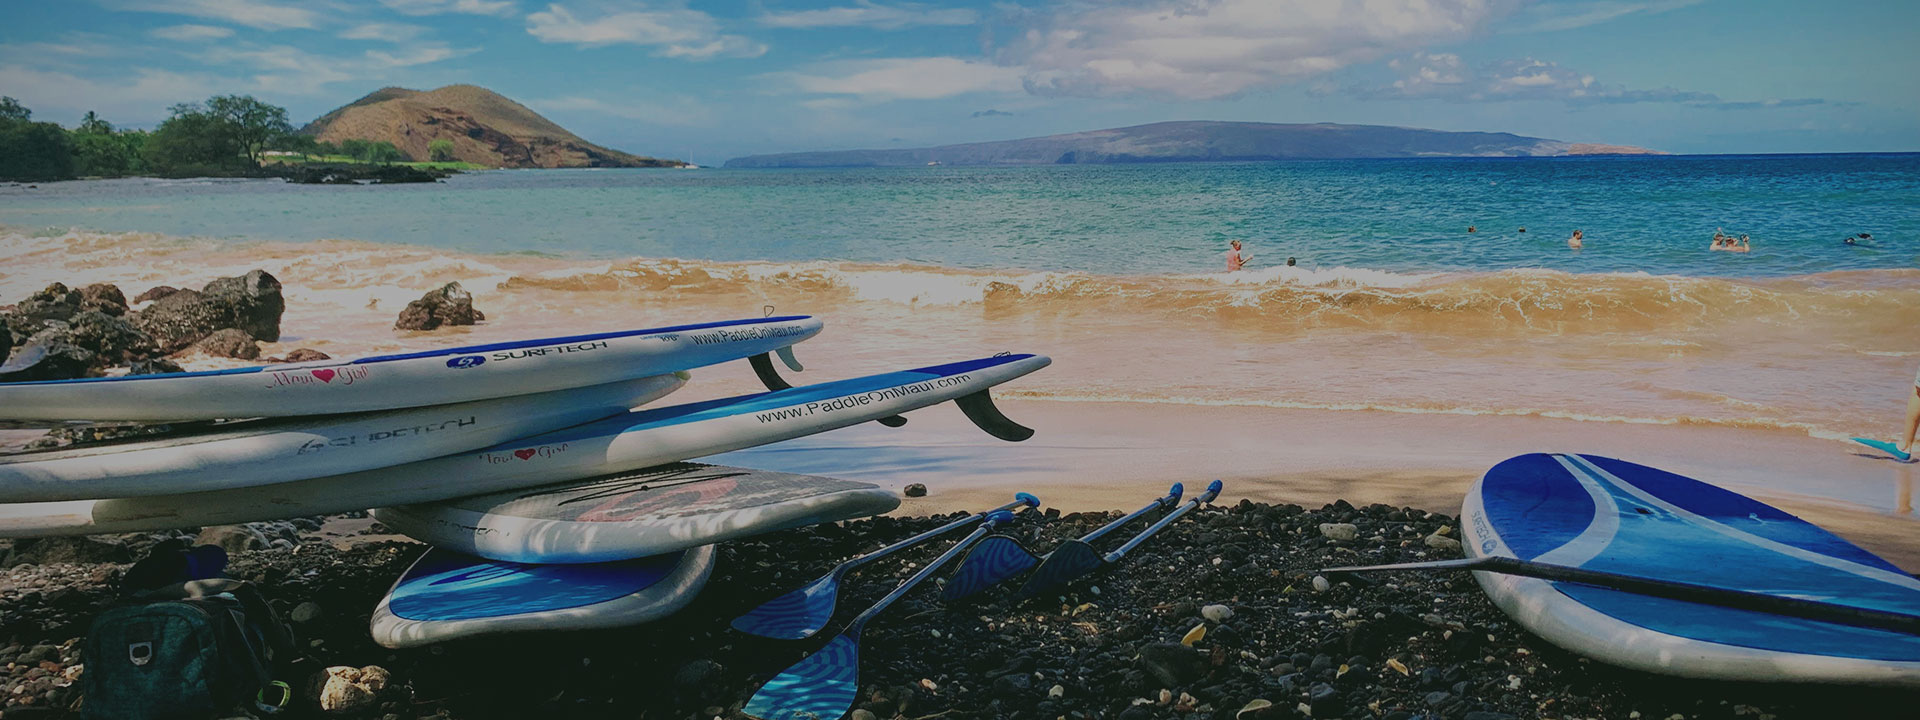 Surfboards laying on a beach